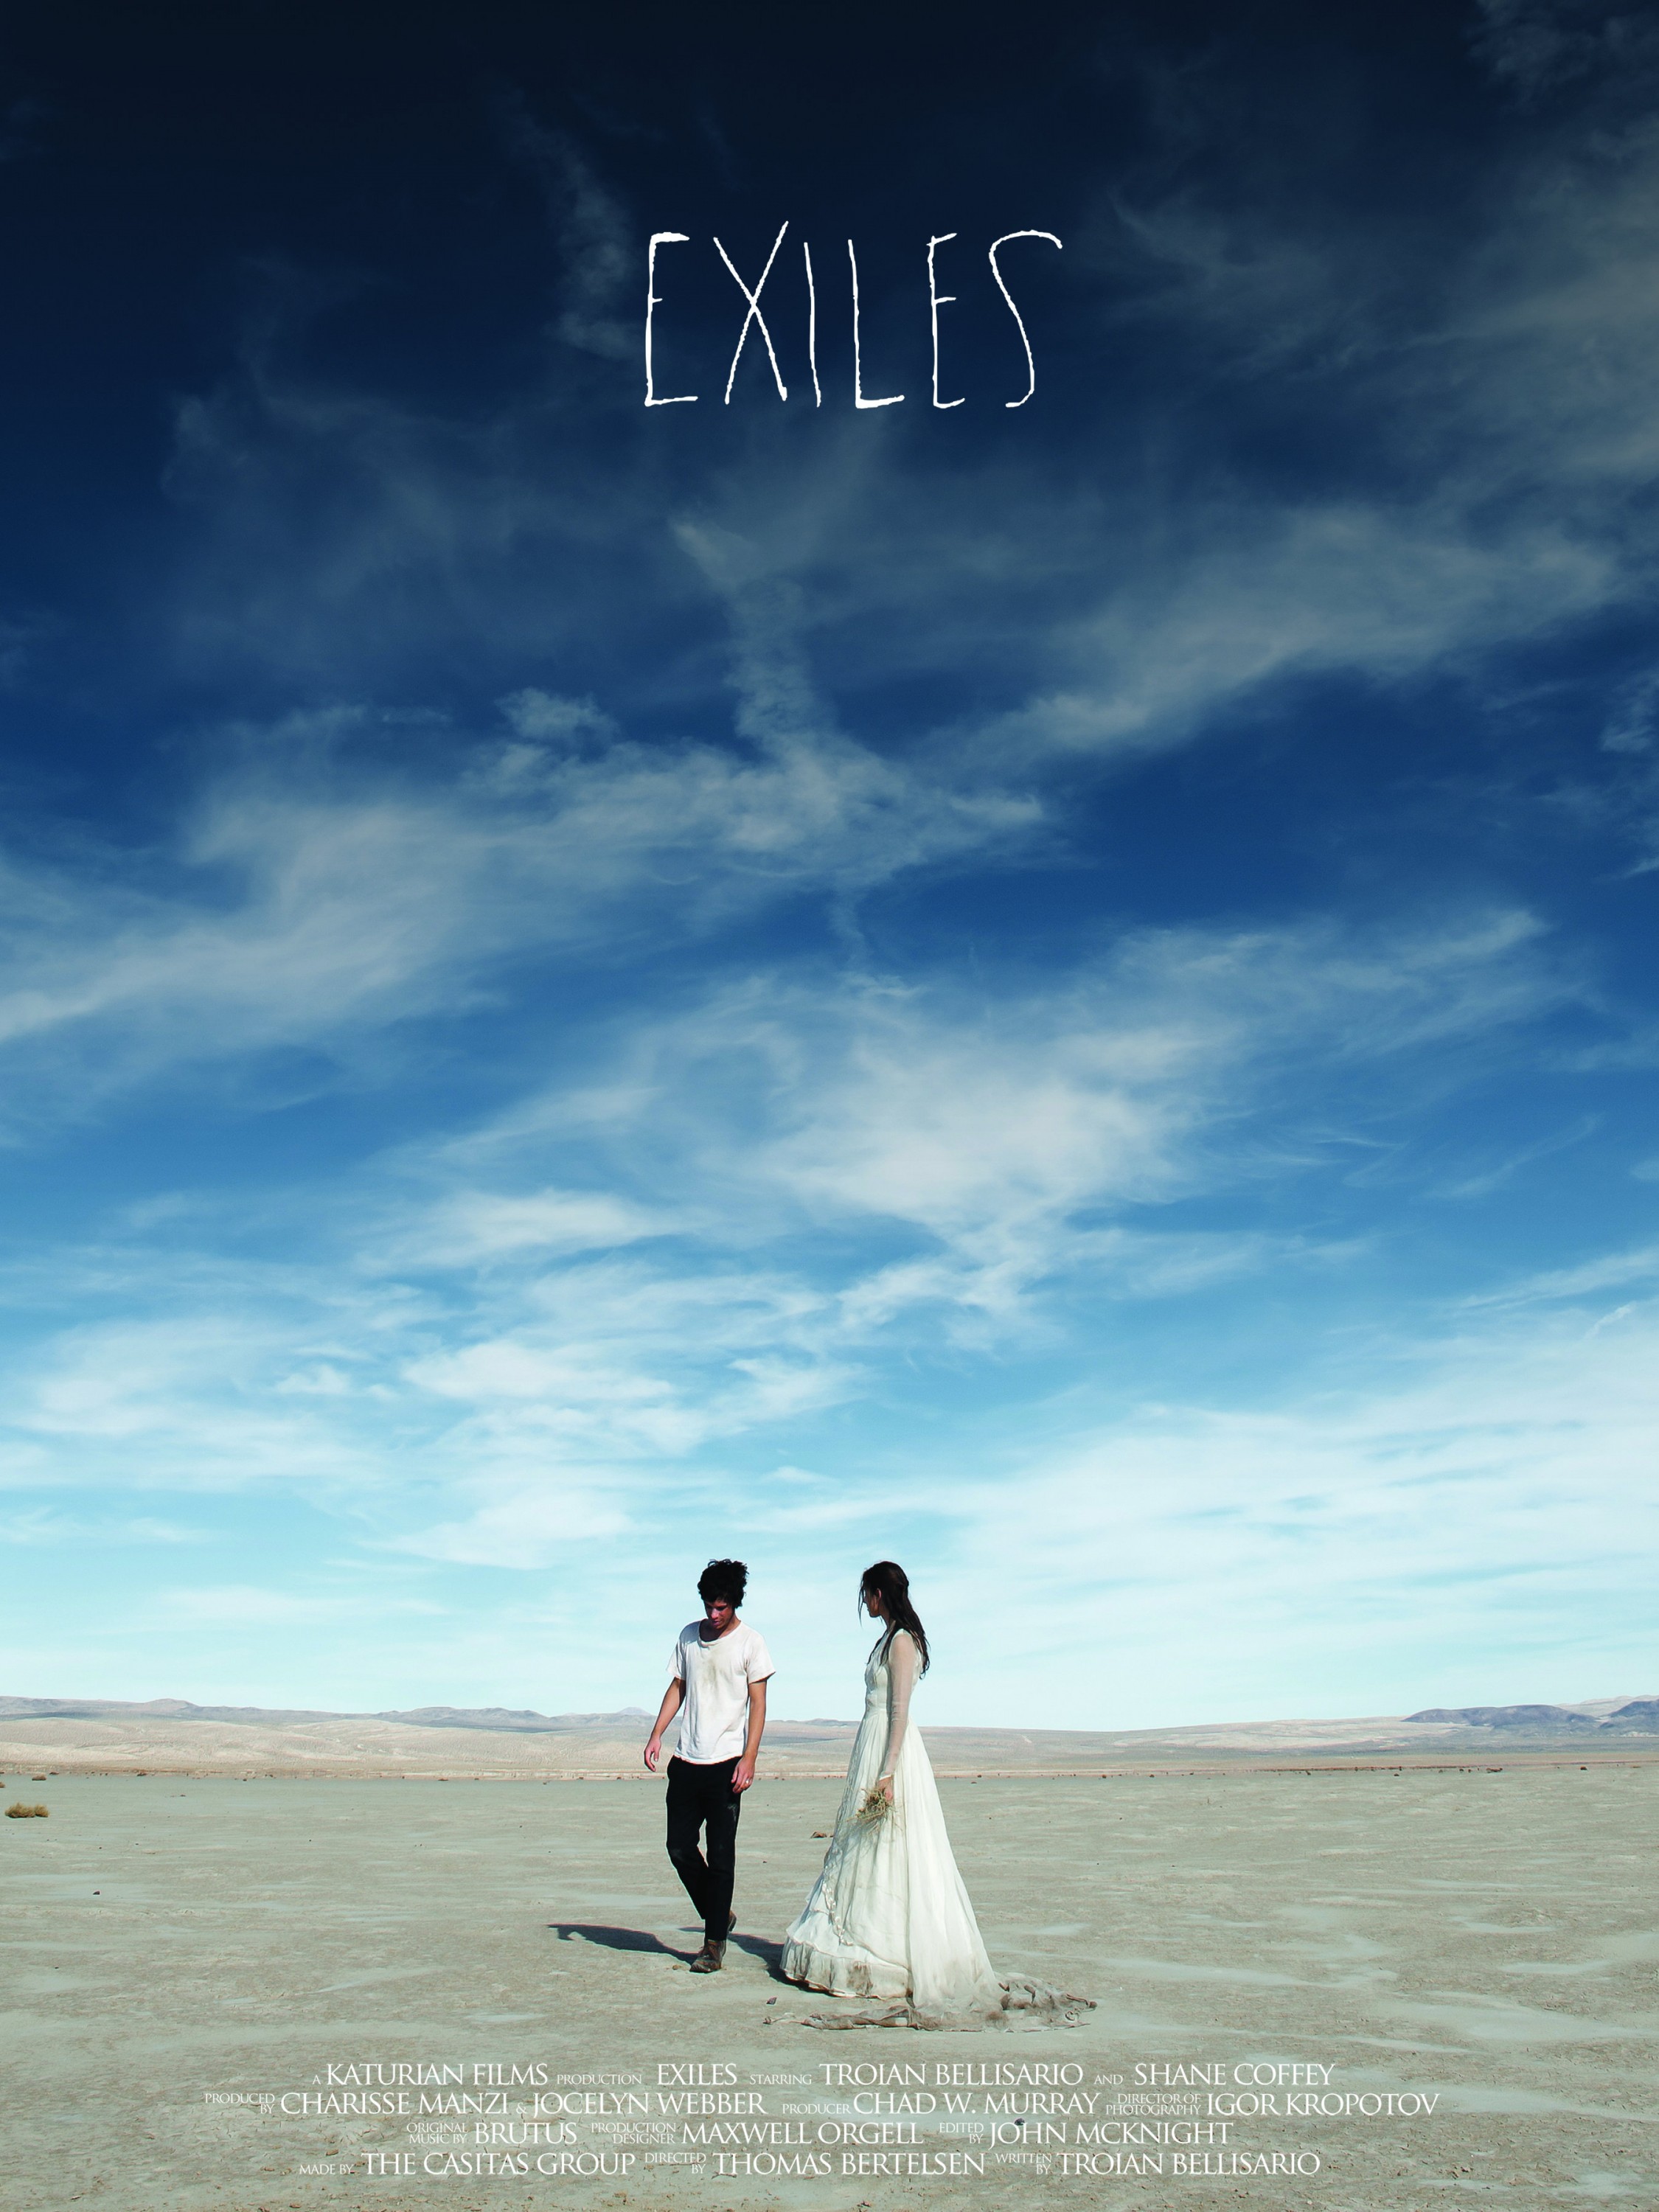 Mega Sized Movie Poster Image for Exiles